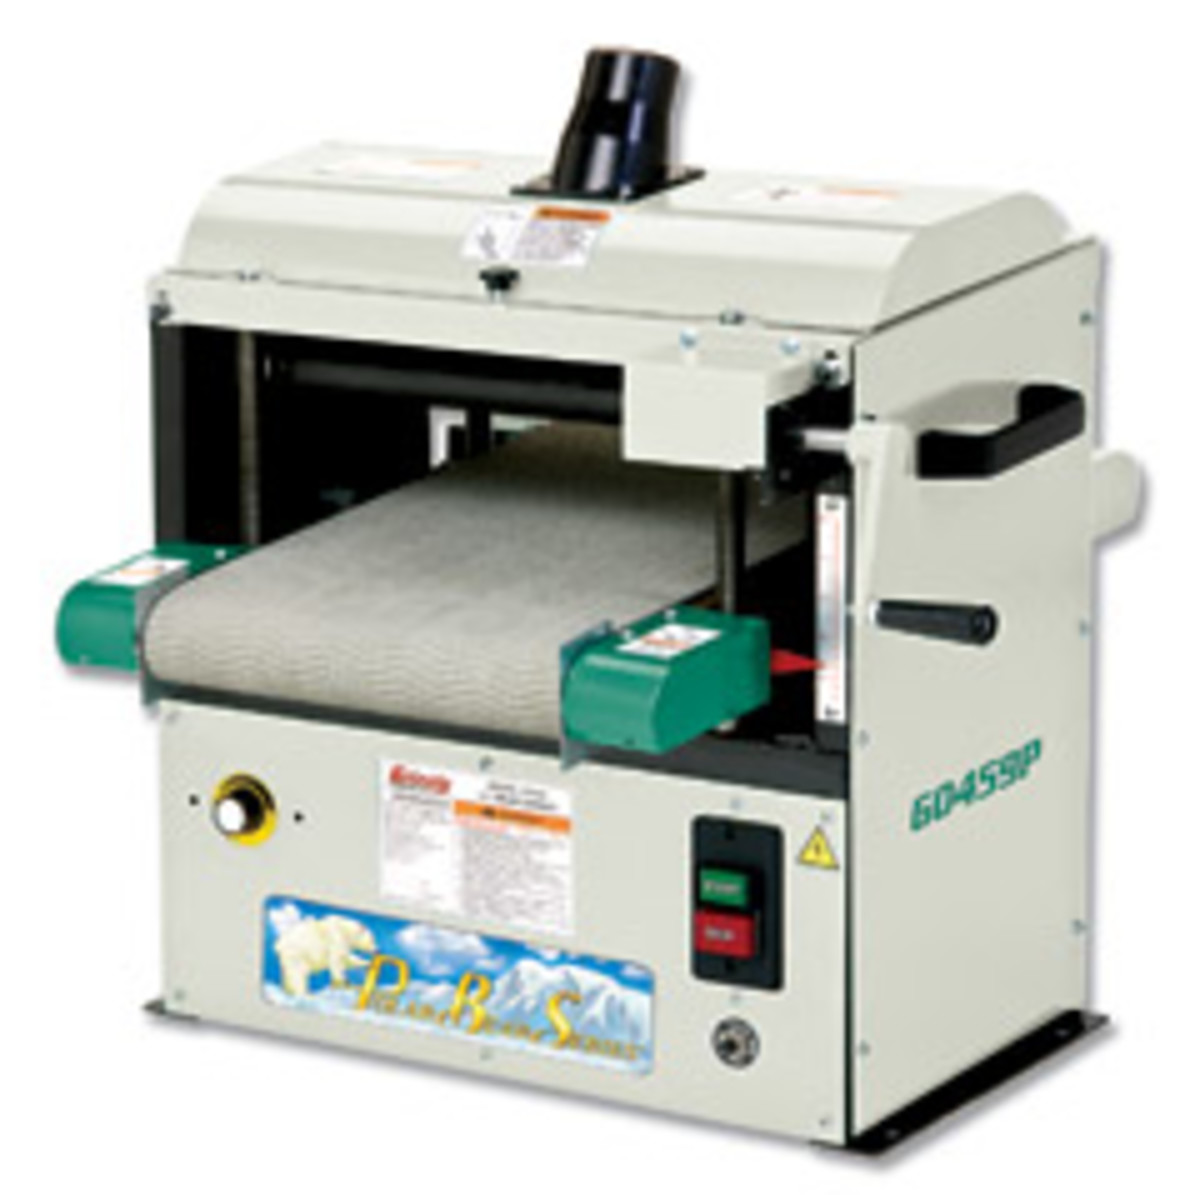 Grizzly's new Polar Bear series includes two new machines, a 10" 2-hp 'hybrid' table saw and 12" 'baby' drum sander.